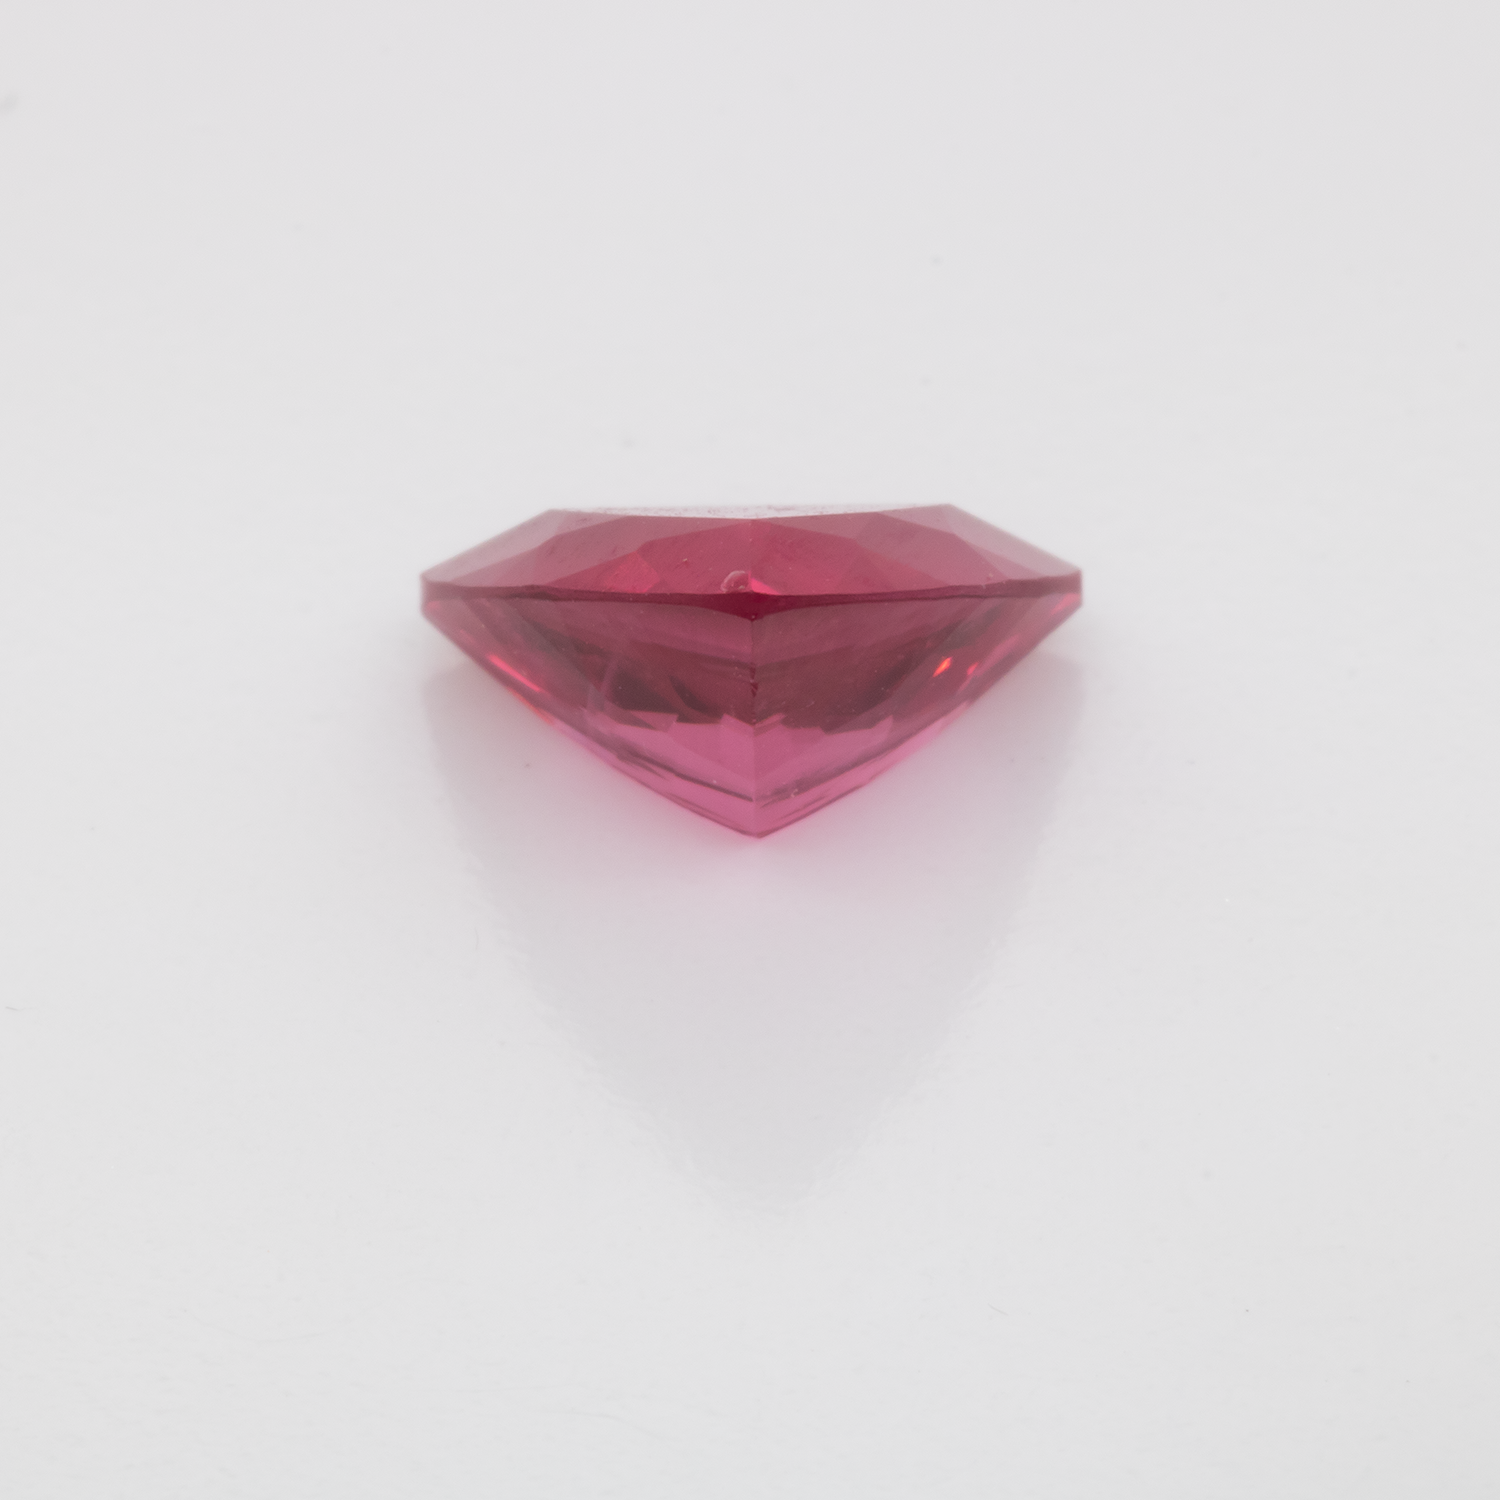 Spinel - red, trillion, 8.5x8.5 mm, 1.94 cts, No. SP90027